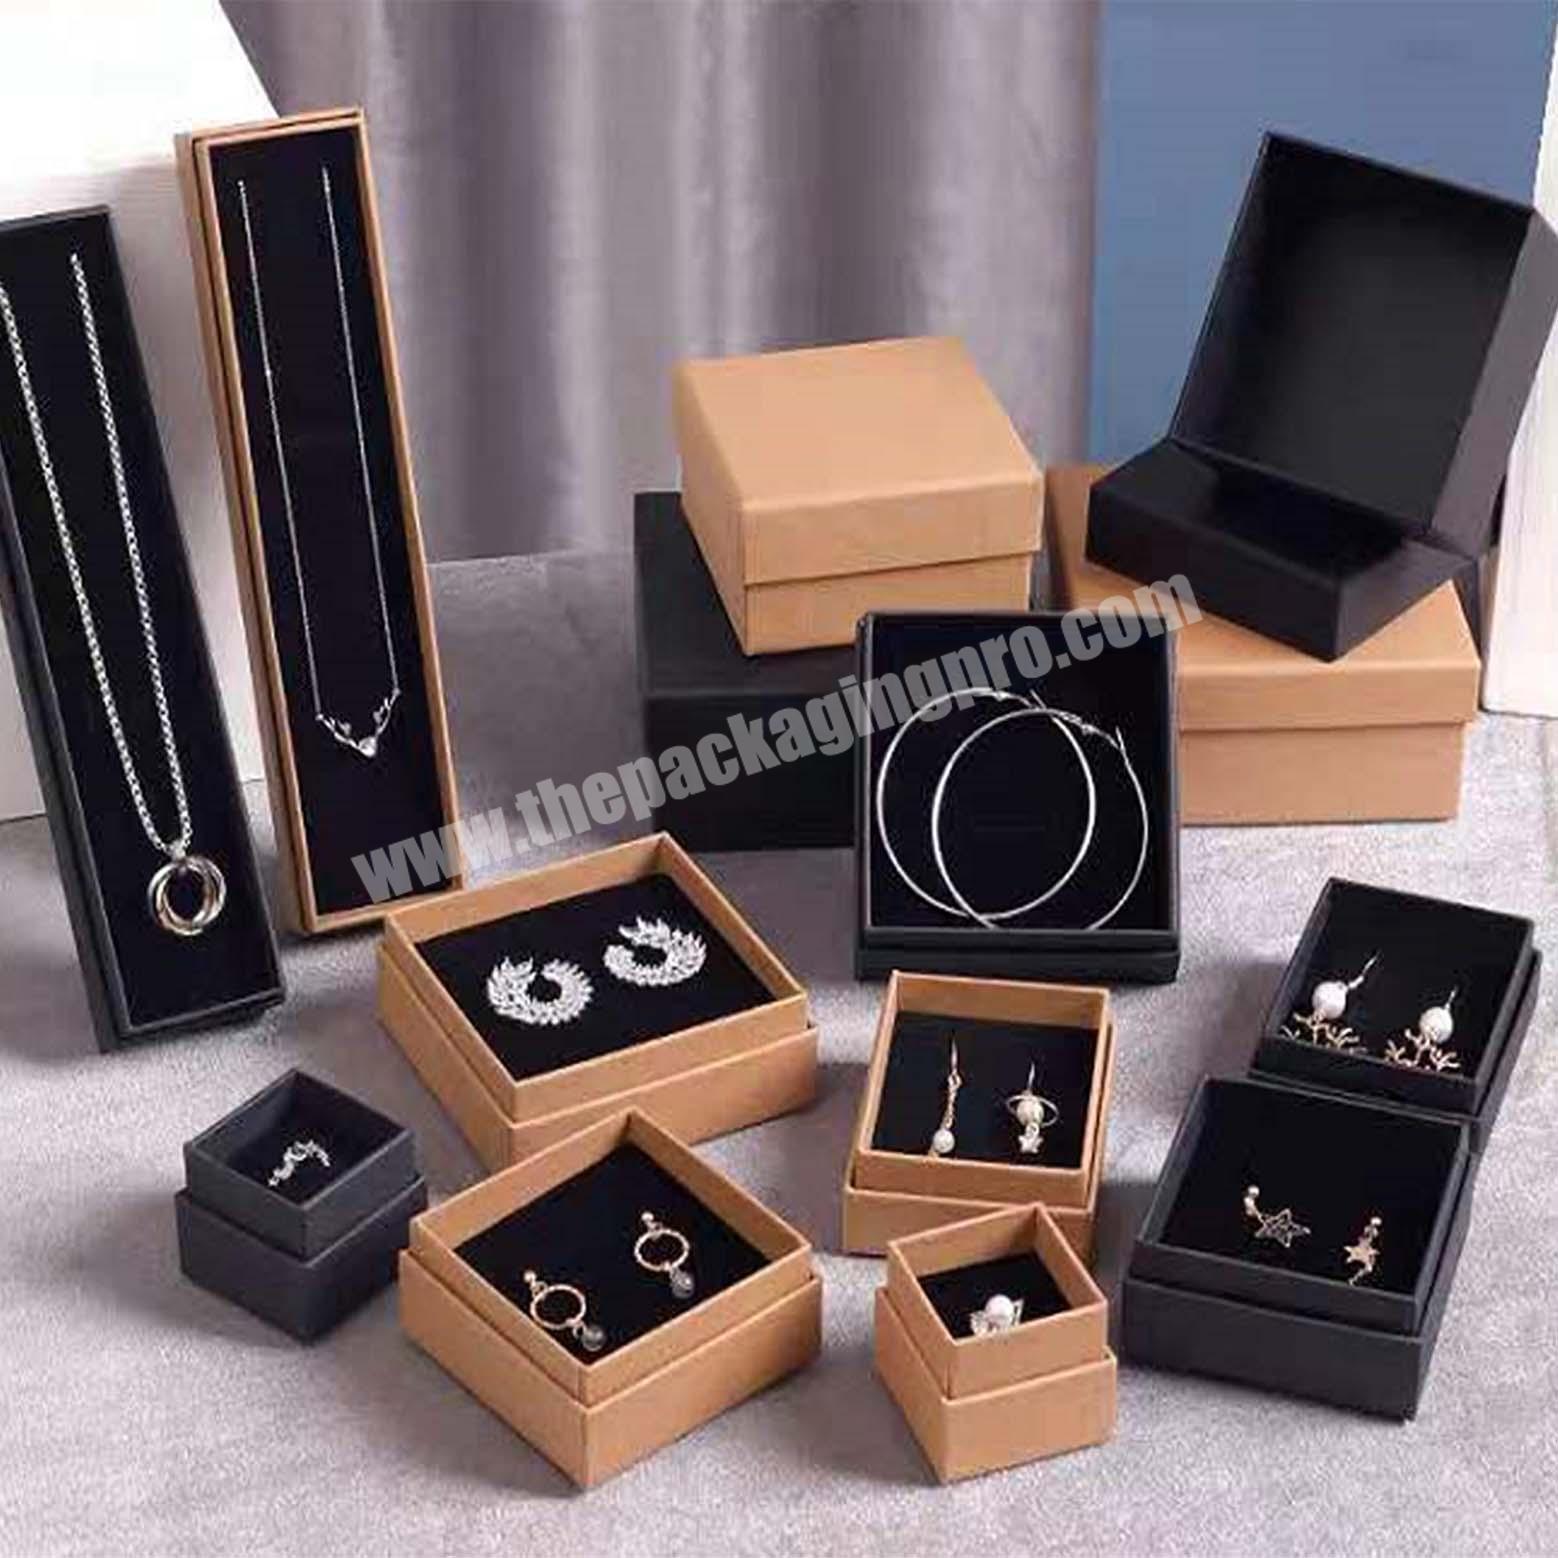 Necklace Jewelry Nail Press Long Paper Gift Box With Black Foam Insert